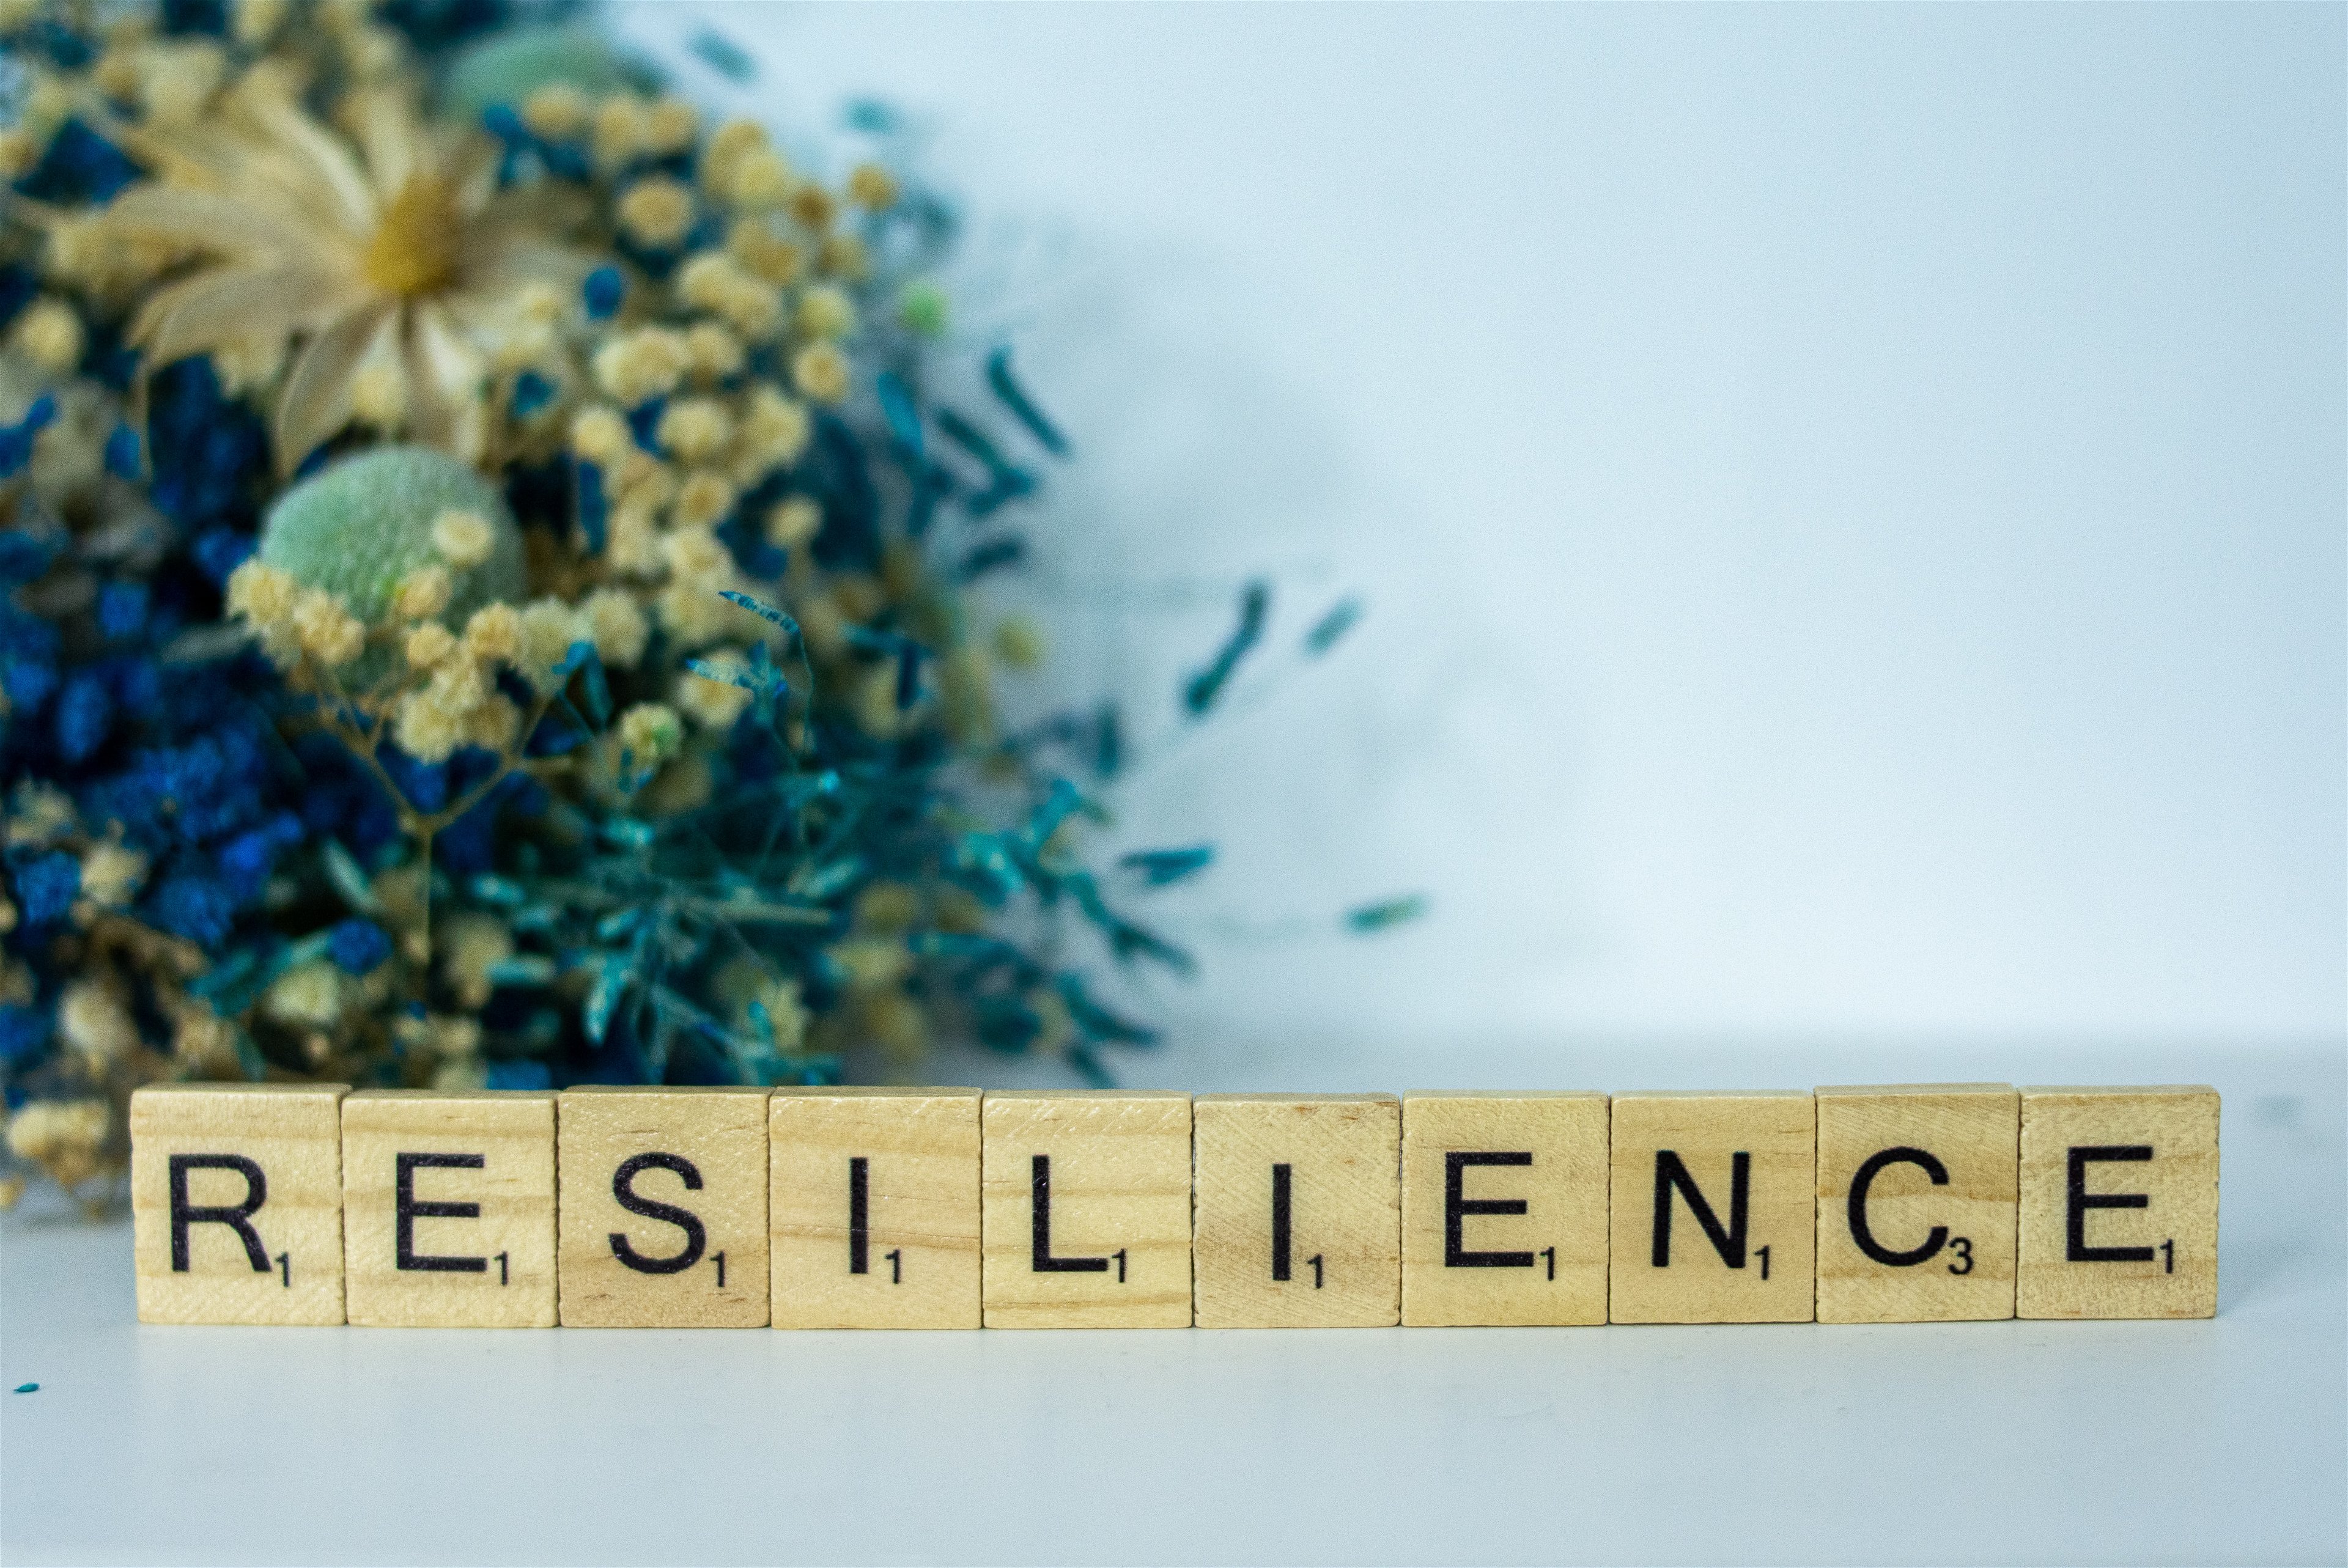 Resilience: Staying adaptable and resilient